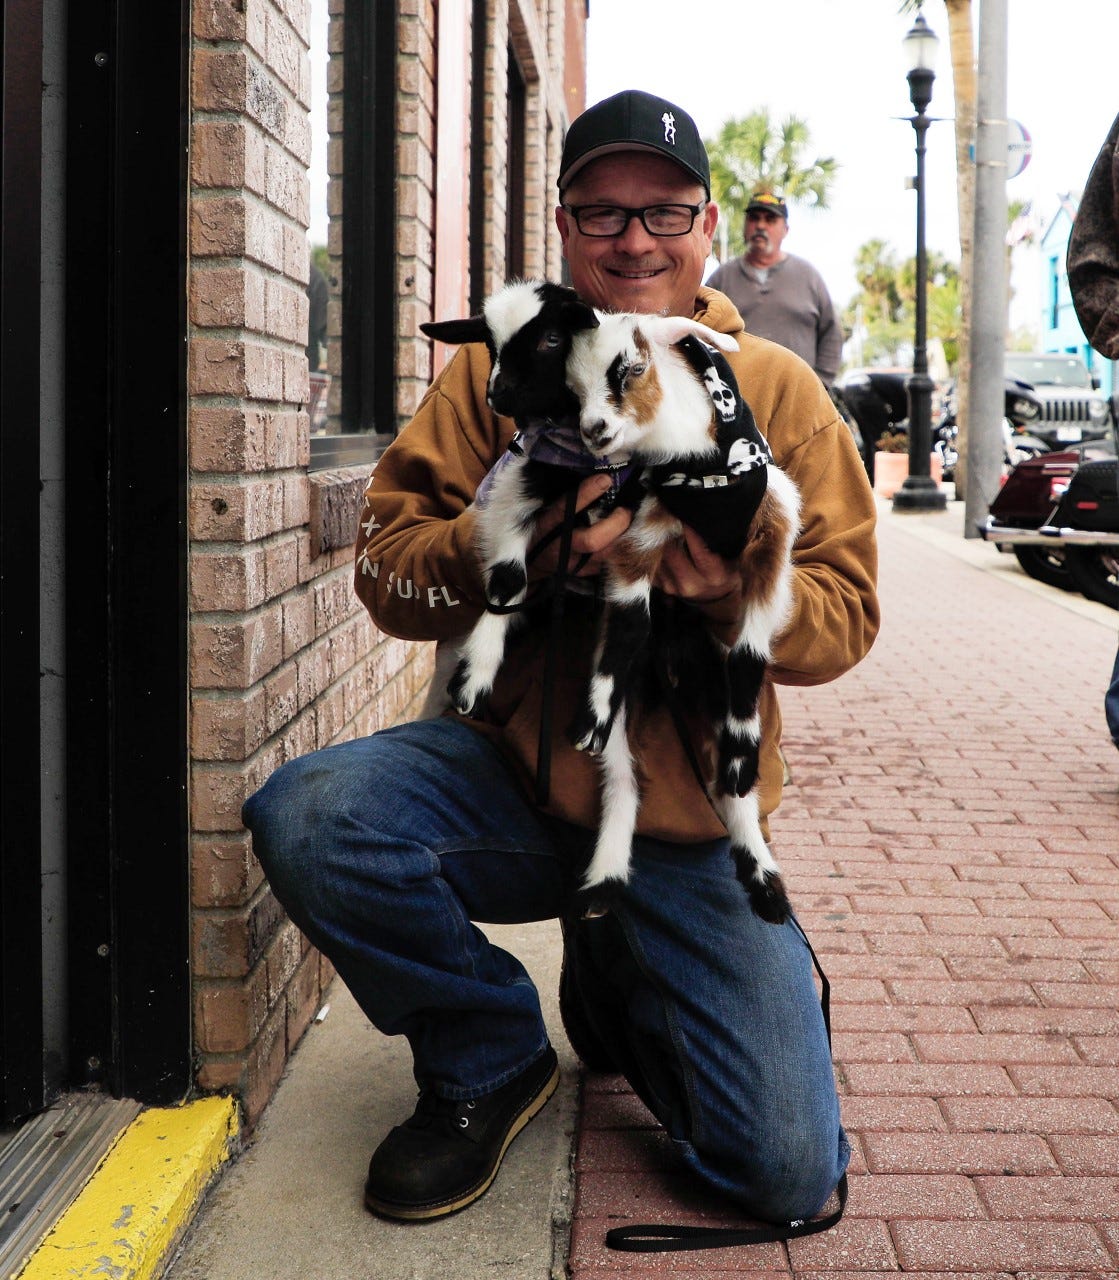 Rick Bodine and his kid goats, Sweetheart and Sparky, greet bikers and visitors on Main Street in Daytona Beach for Bike Week, Sunday, March 13, 2022.